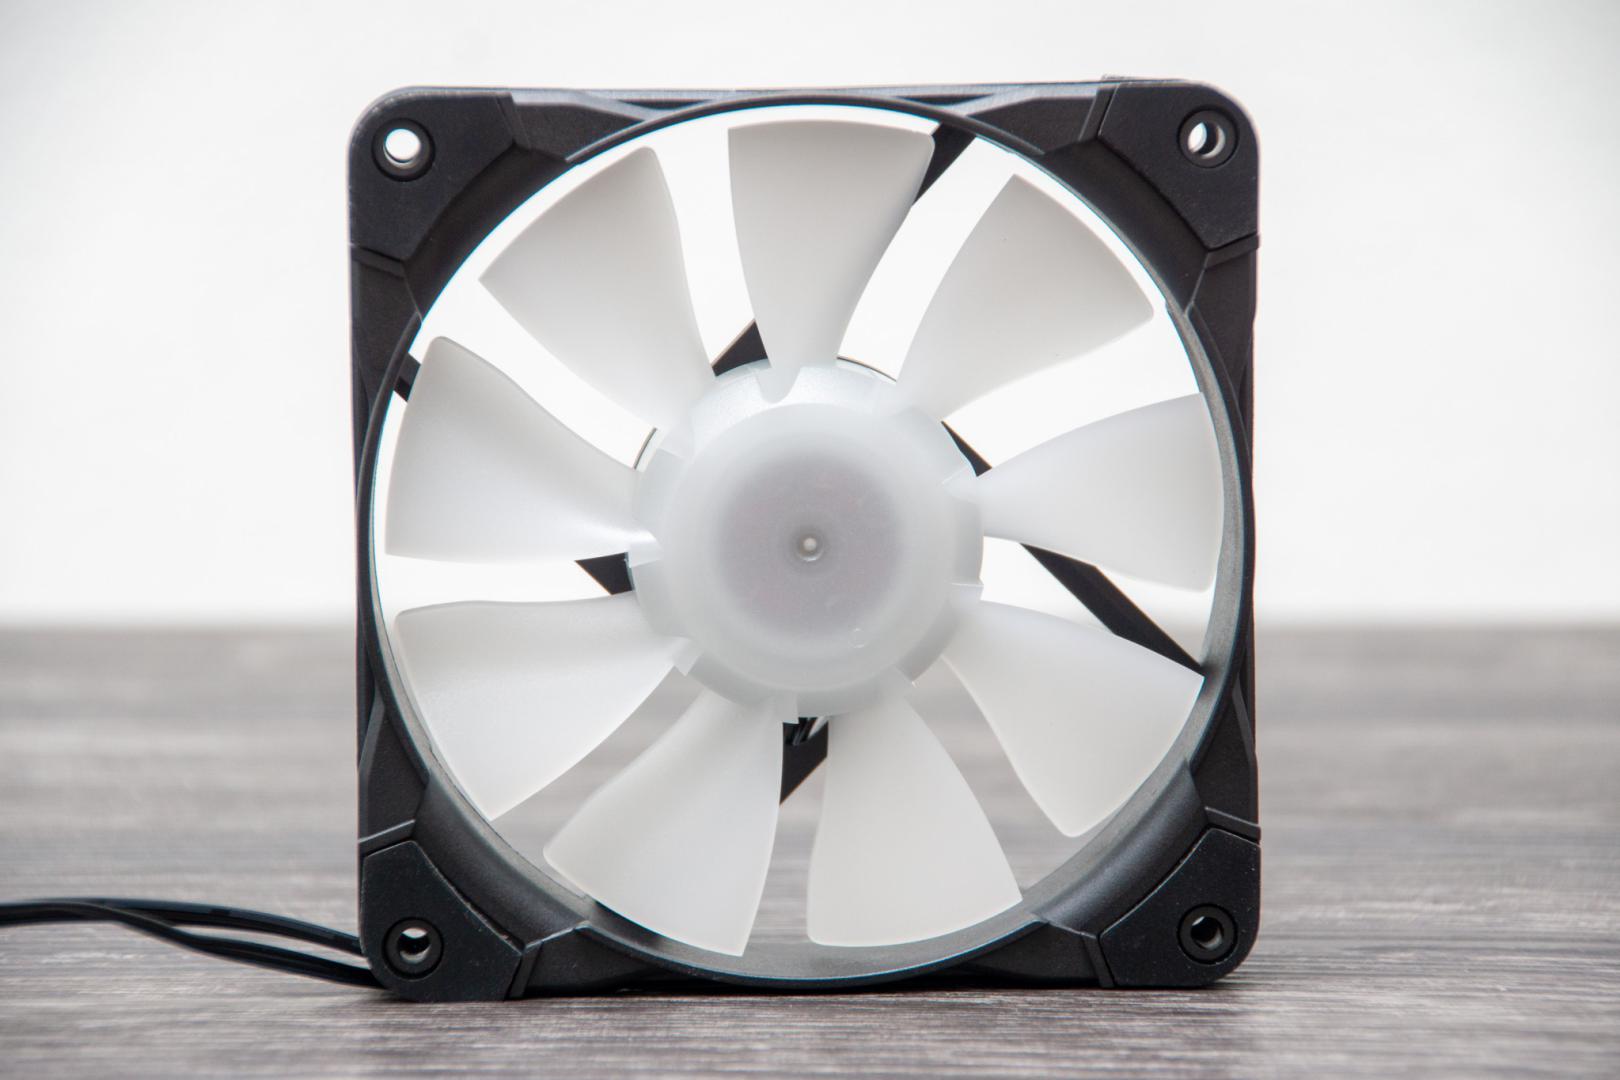 How Many Inches Wide Is A 120mm Case Fan?